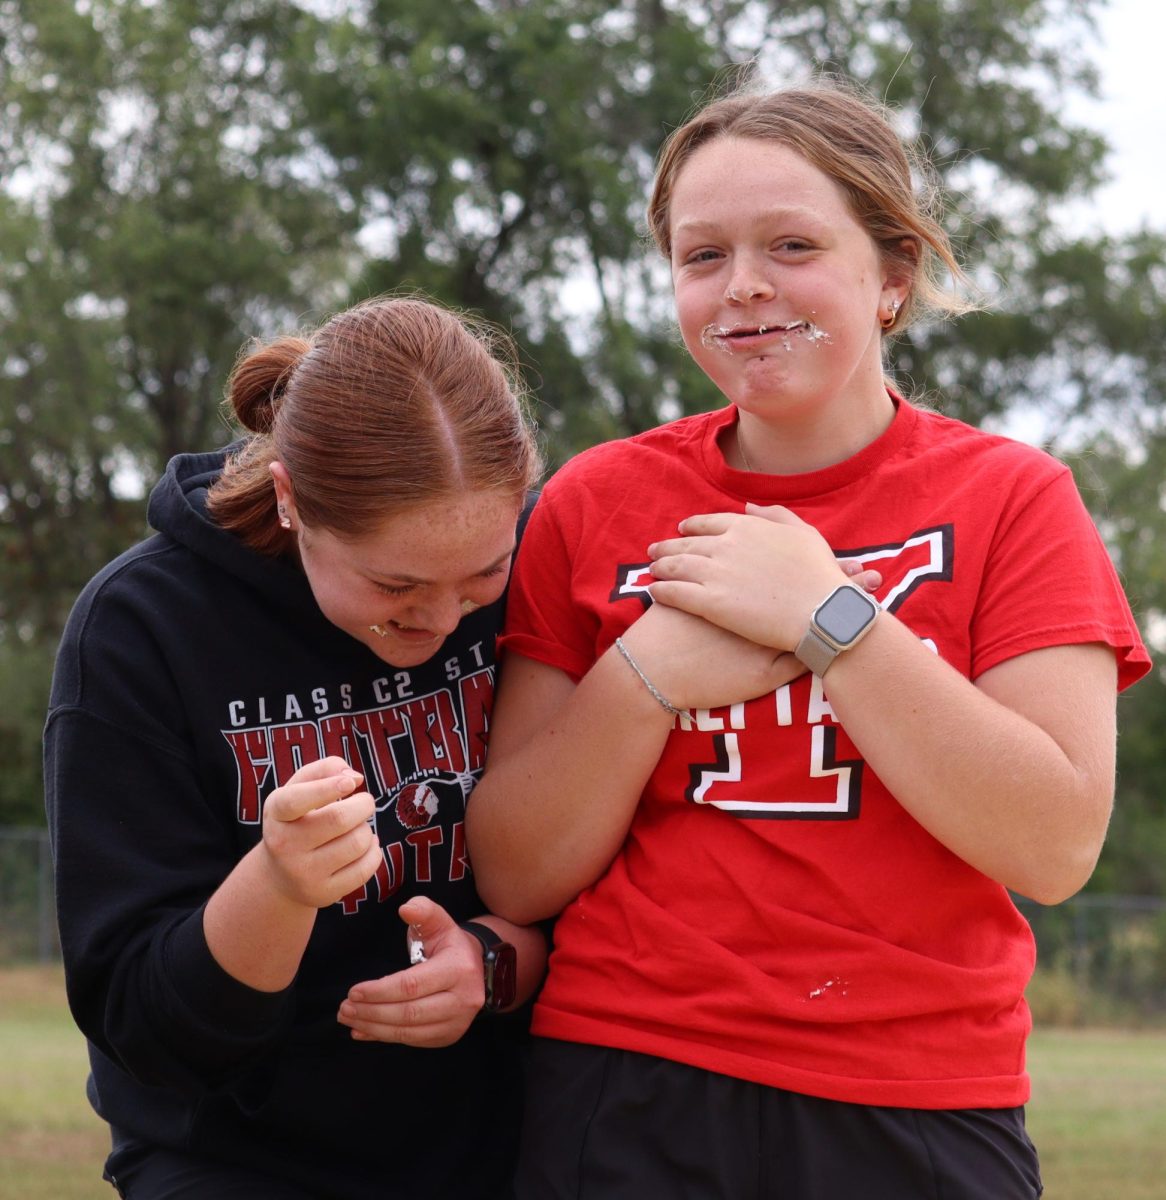 During the Chieftain Games, eighth-graders Ansley DeGroff and Kinsley Smith laugh while competing in the cupcake eating contest. Their team finished eight cupcakes. “It was fun,” said Smith. “You got to be competitive, plus I didn’t have my mom nagging at me to slow down in the competition.”